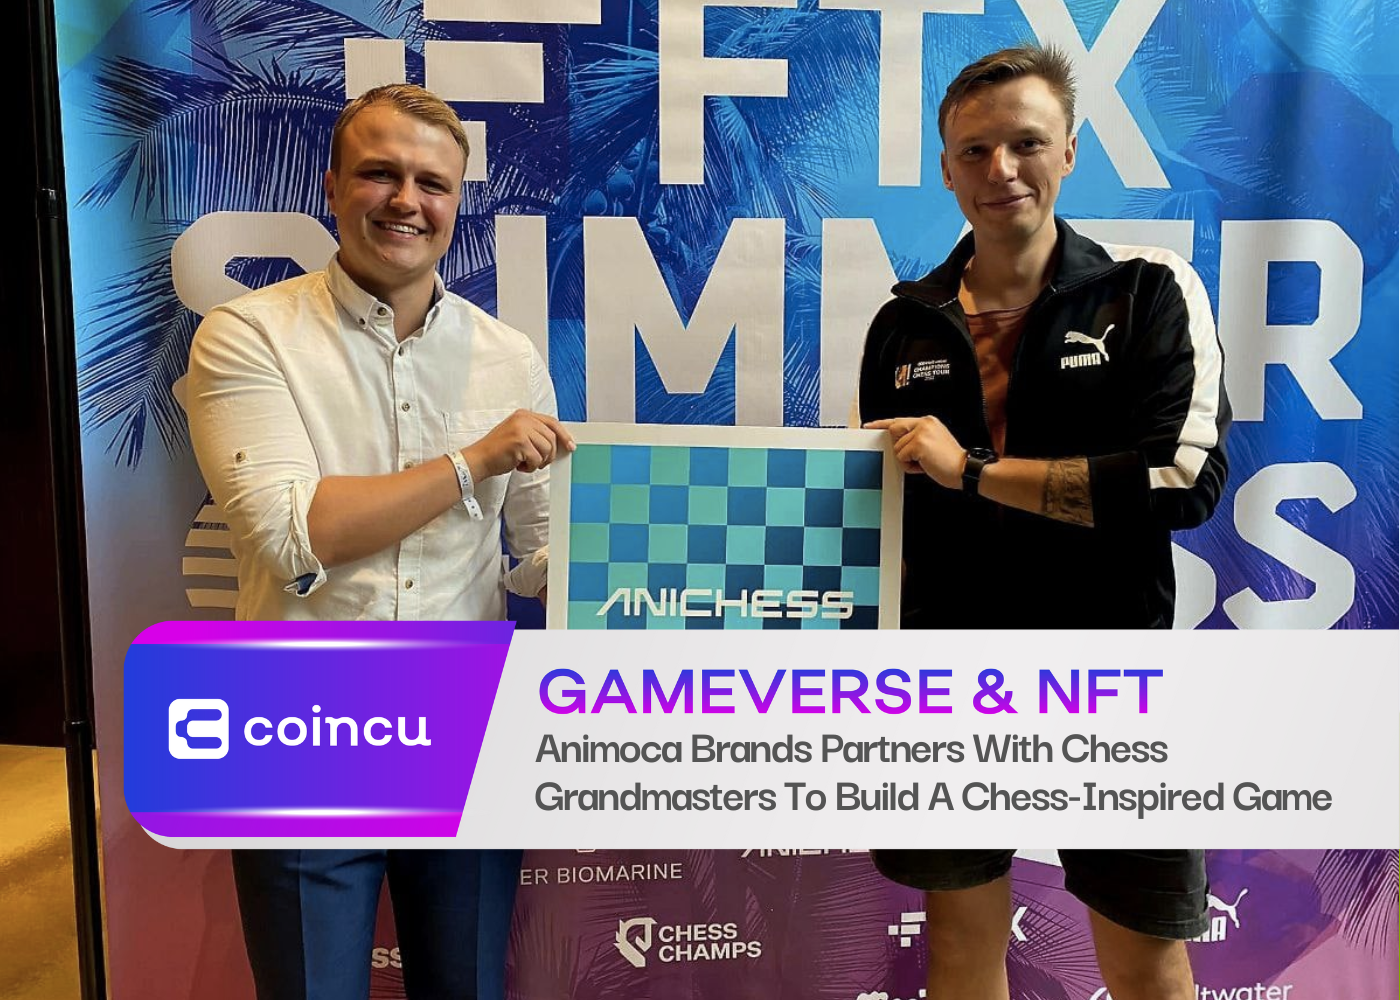 Animoca Brands Partners With Chess Grandmasters To Build A Chess-Inspired Game